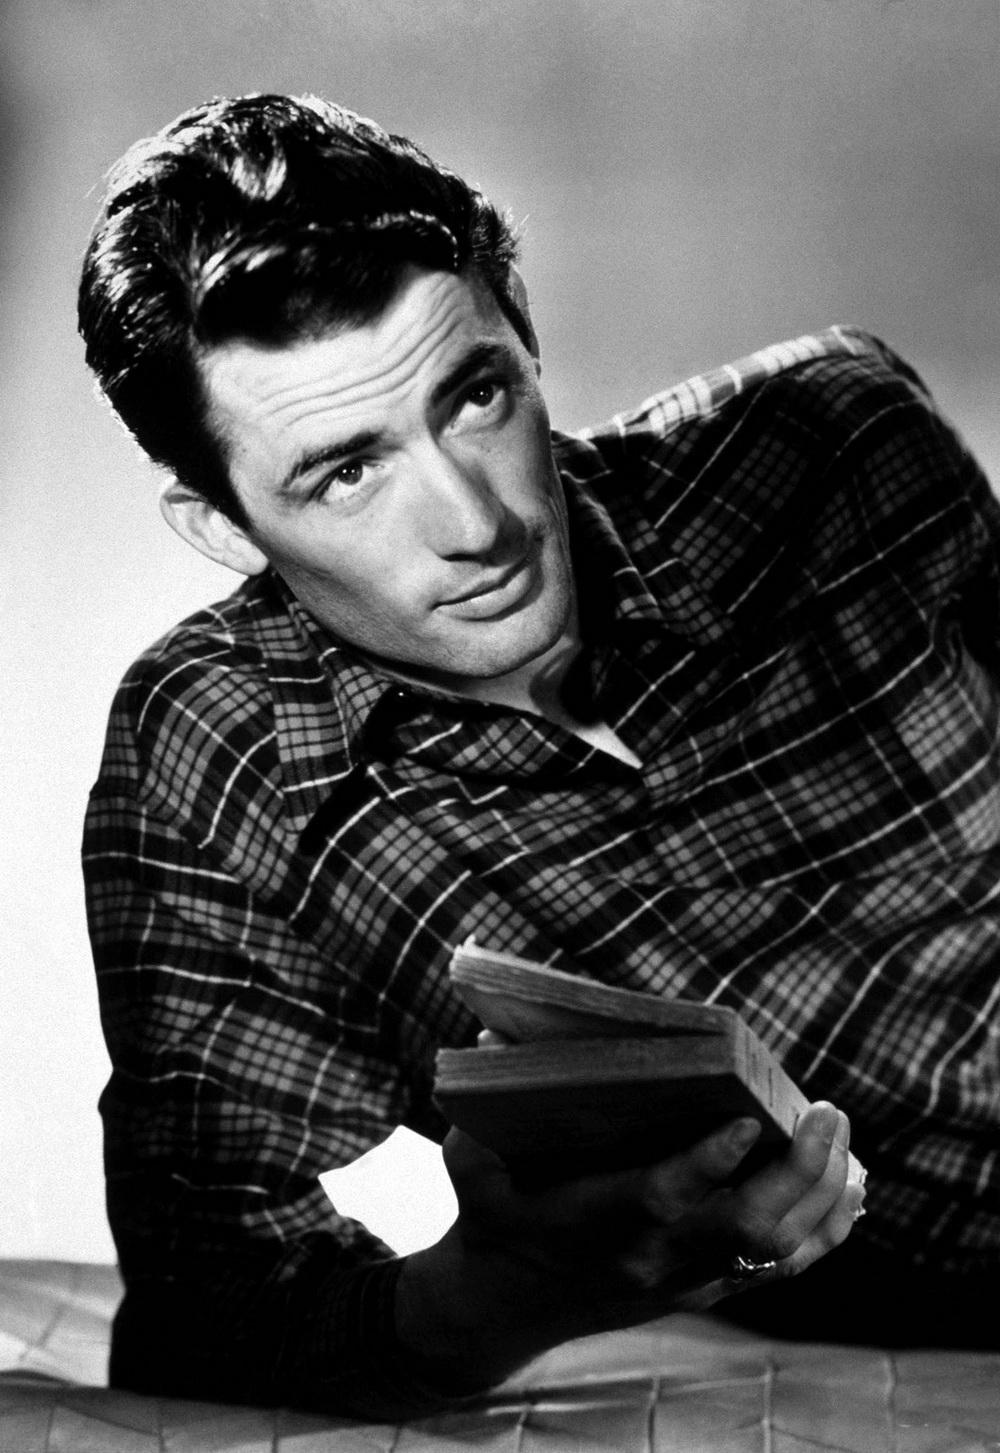 Photo №1614 Gregory Peck.